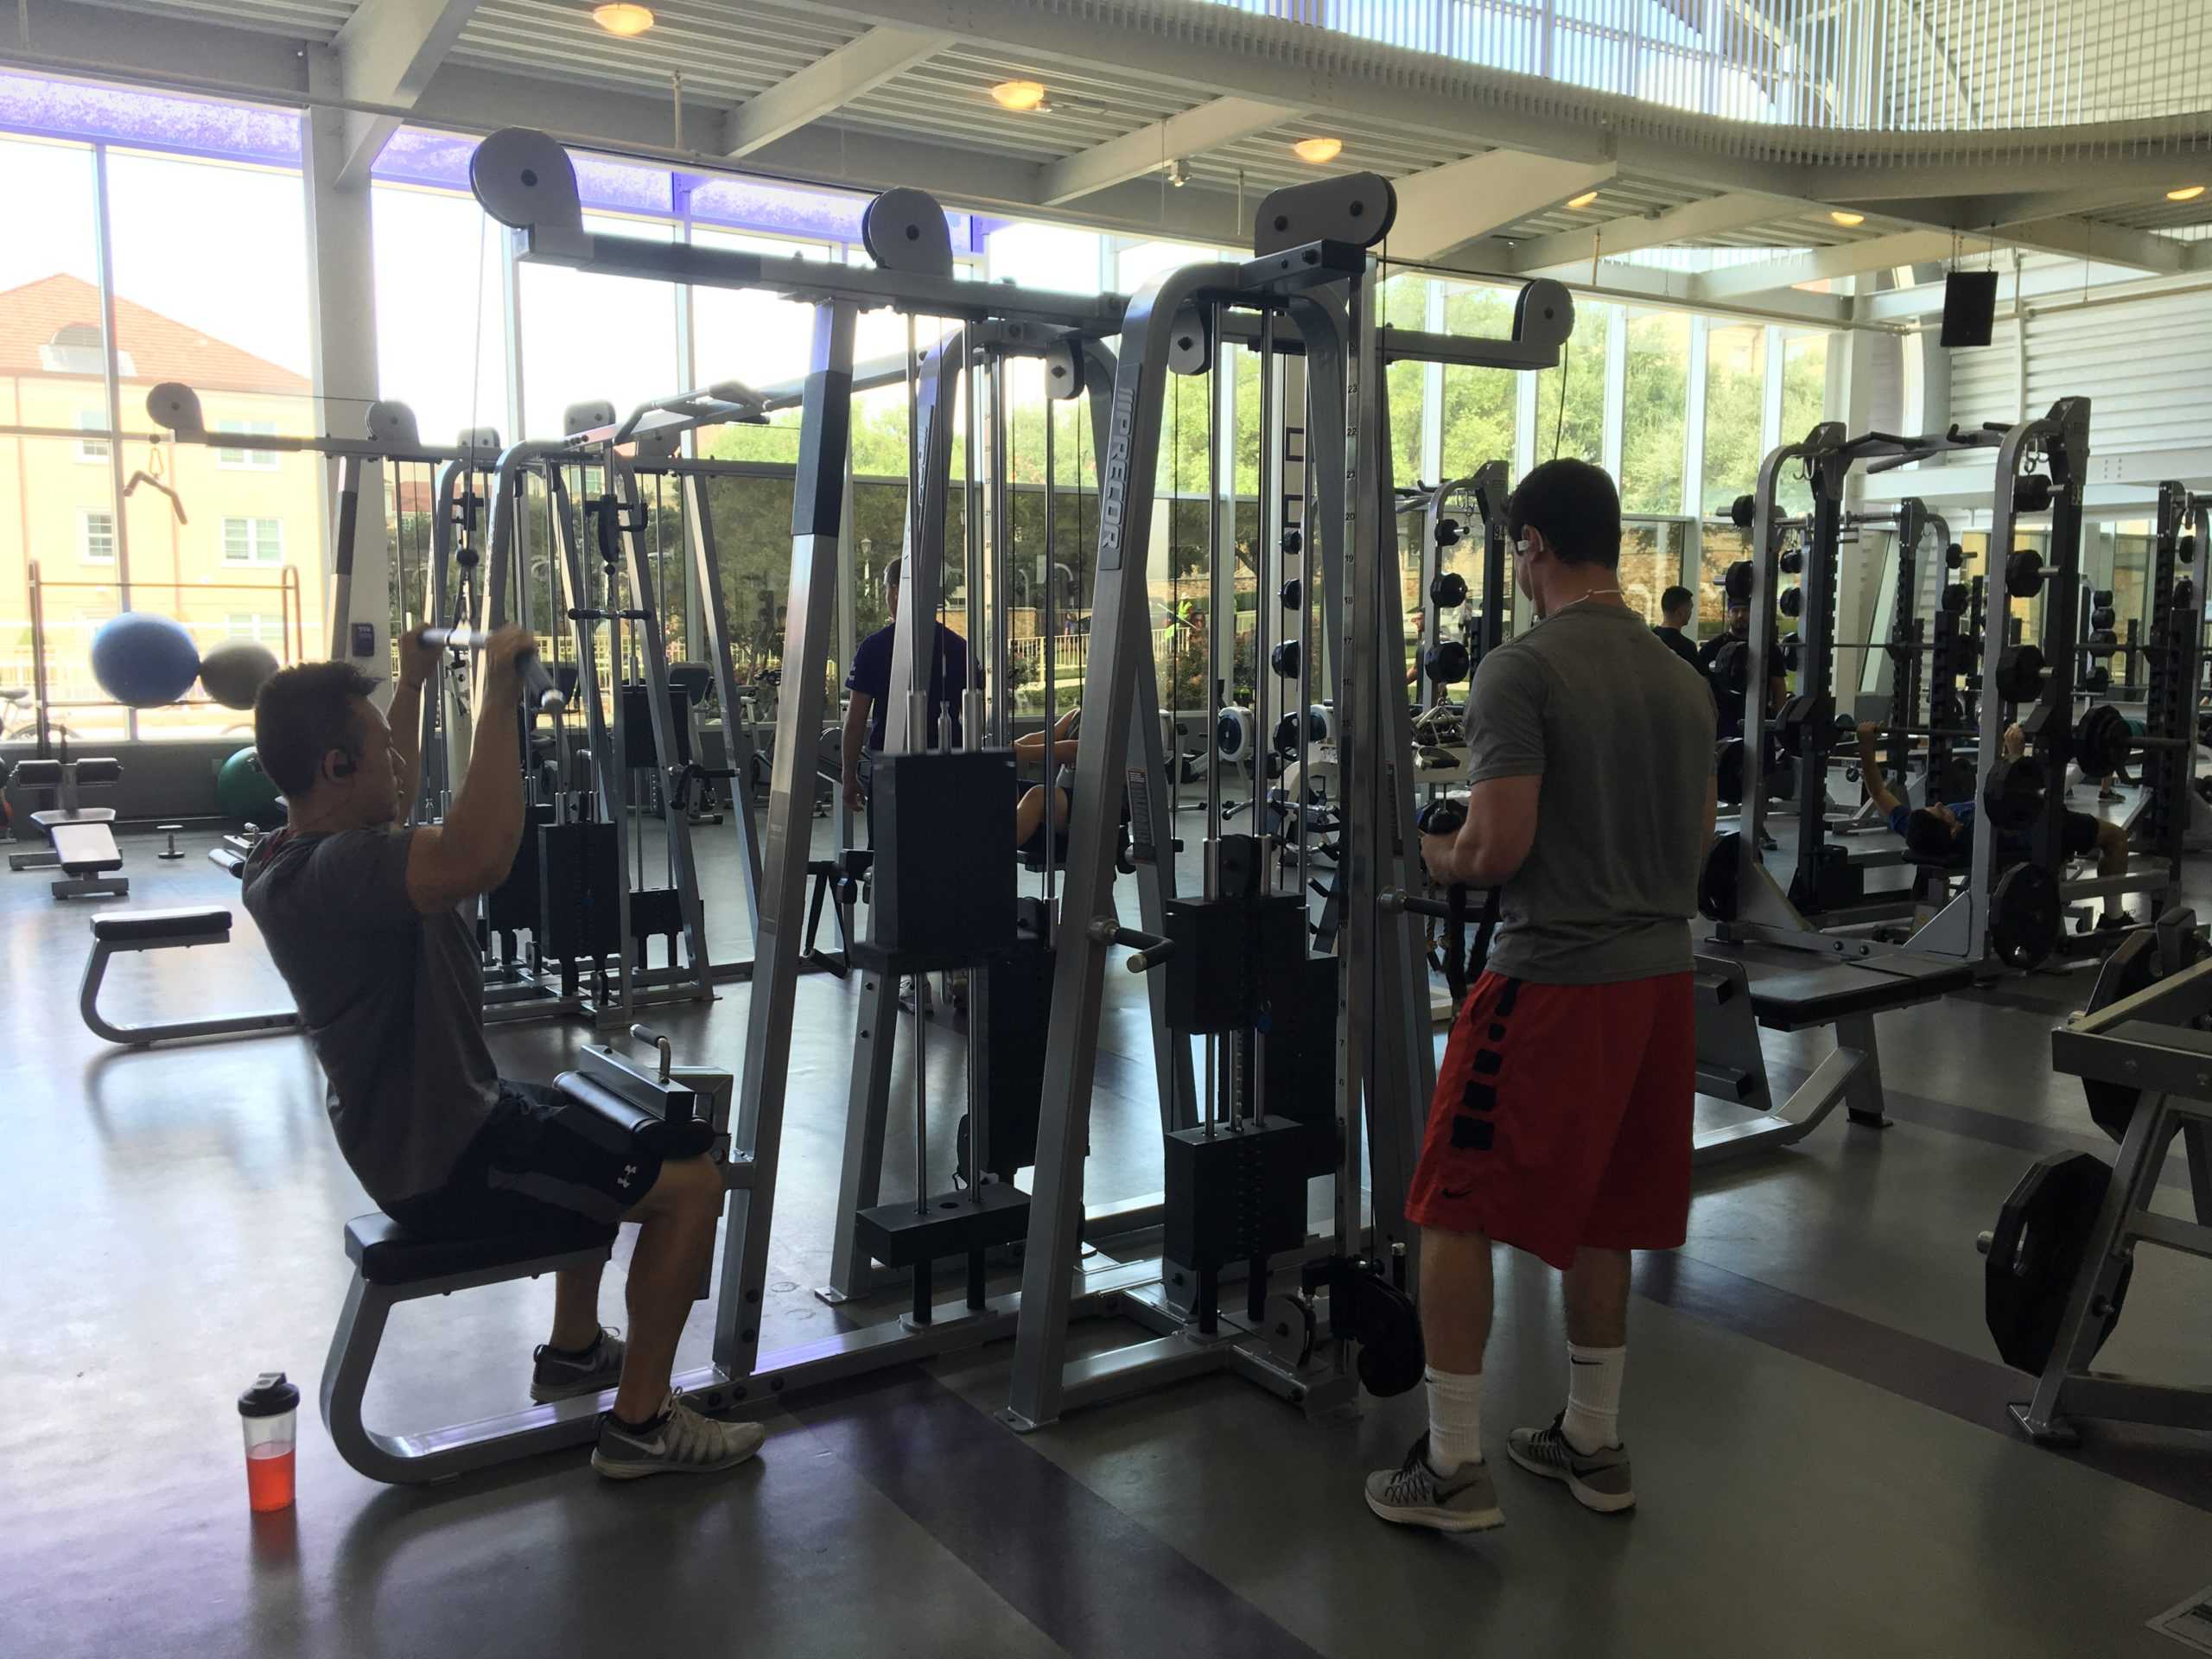 The new multi-gym unit can be found in the weight room.